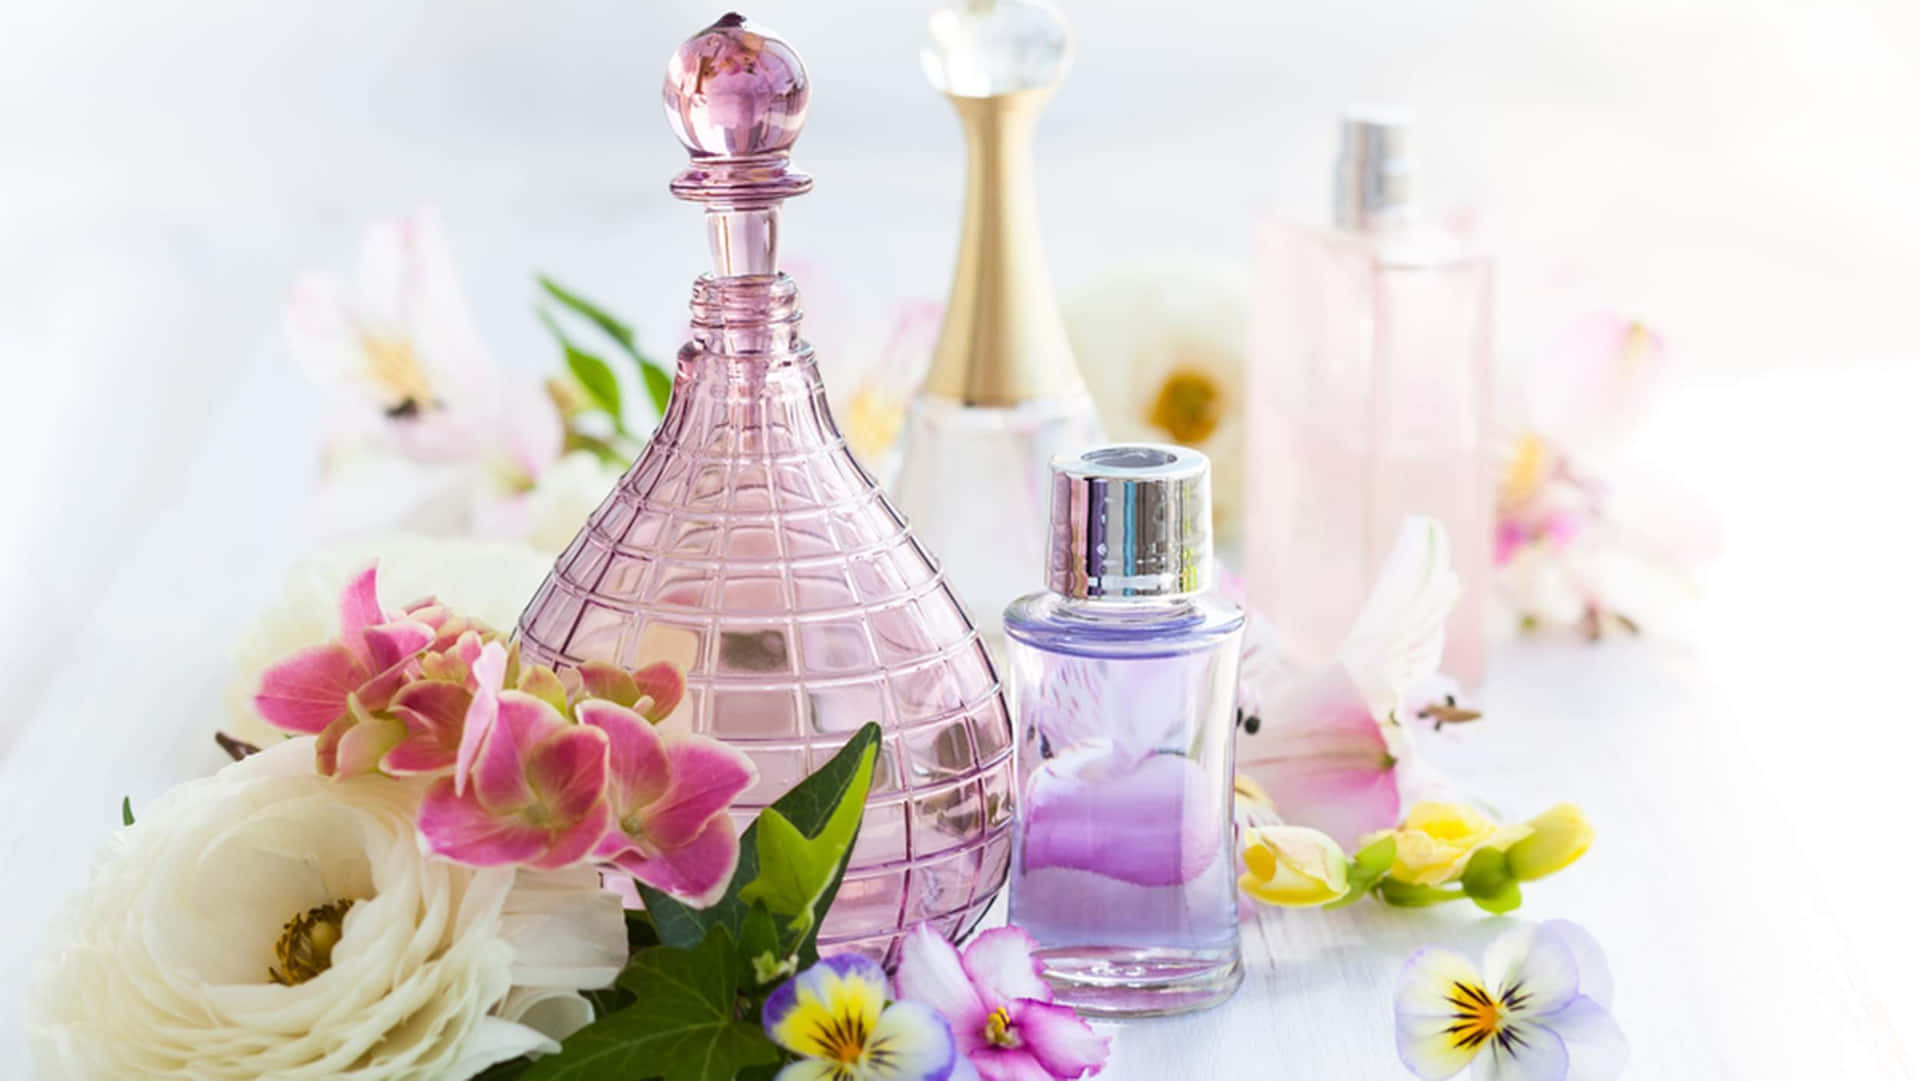 A Spring Perfume bottle surrounded by colorful flowers Wallpaper